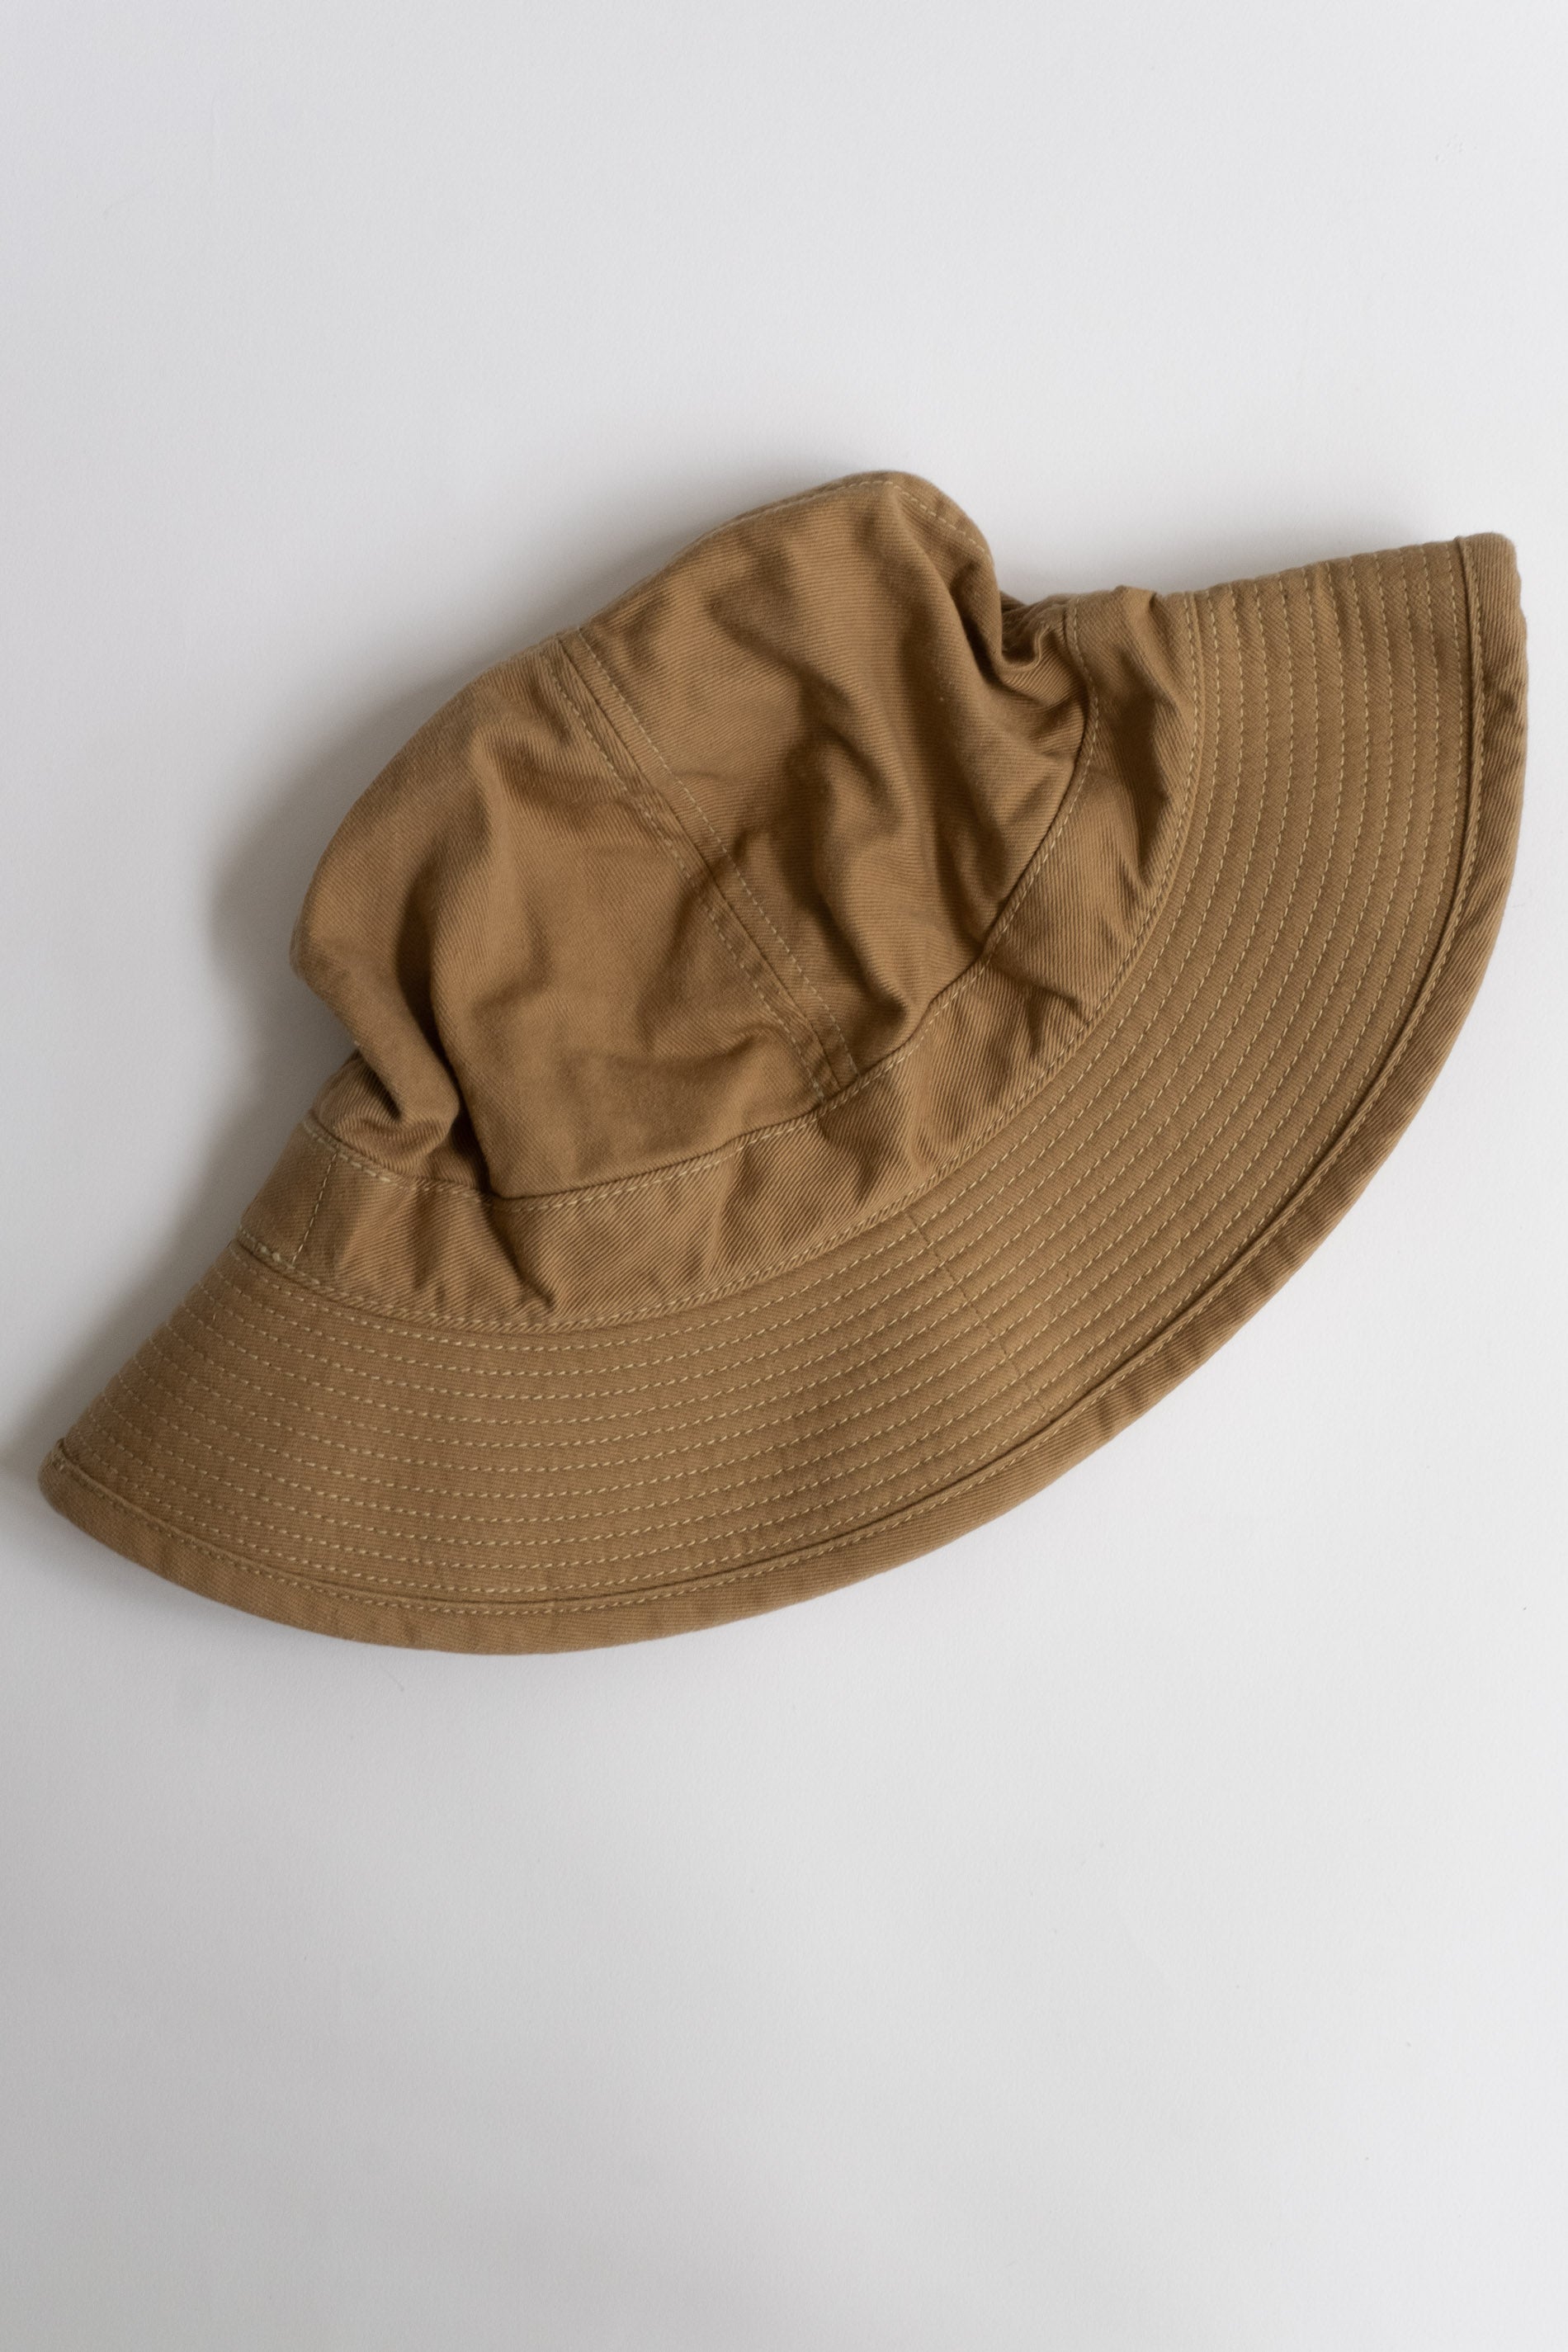 NAVY orSlow RELIQUARY IN – US CHINO | HAT KHAKI